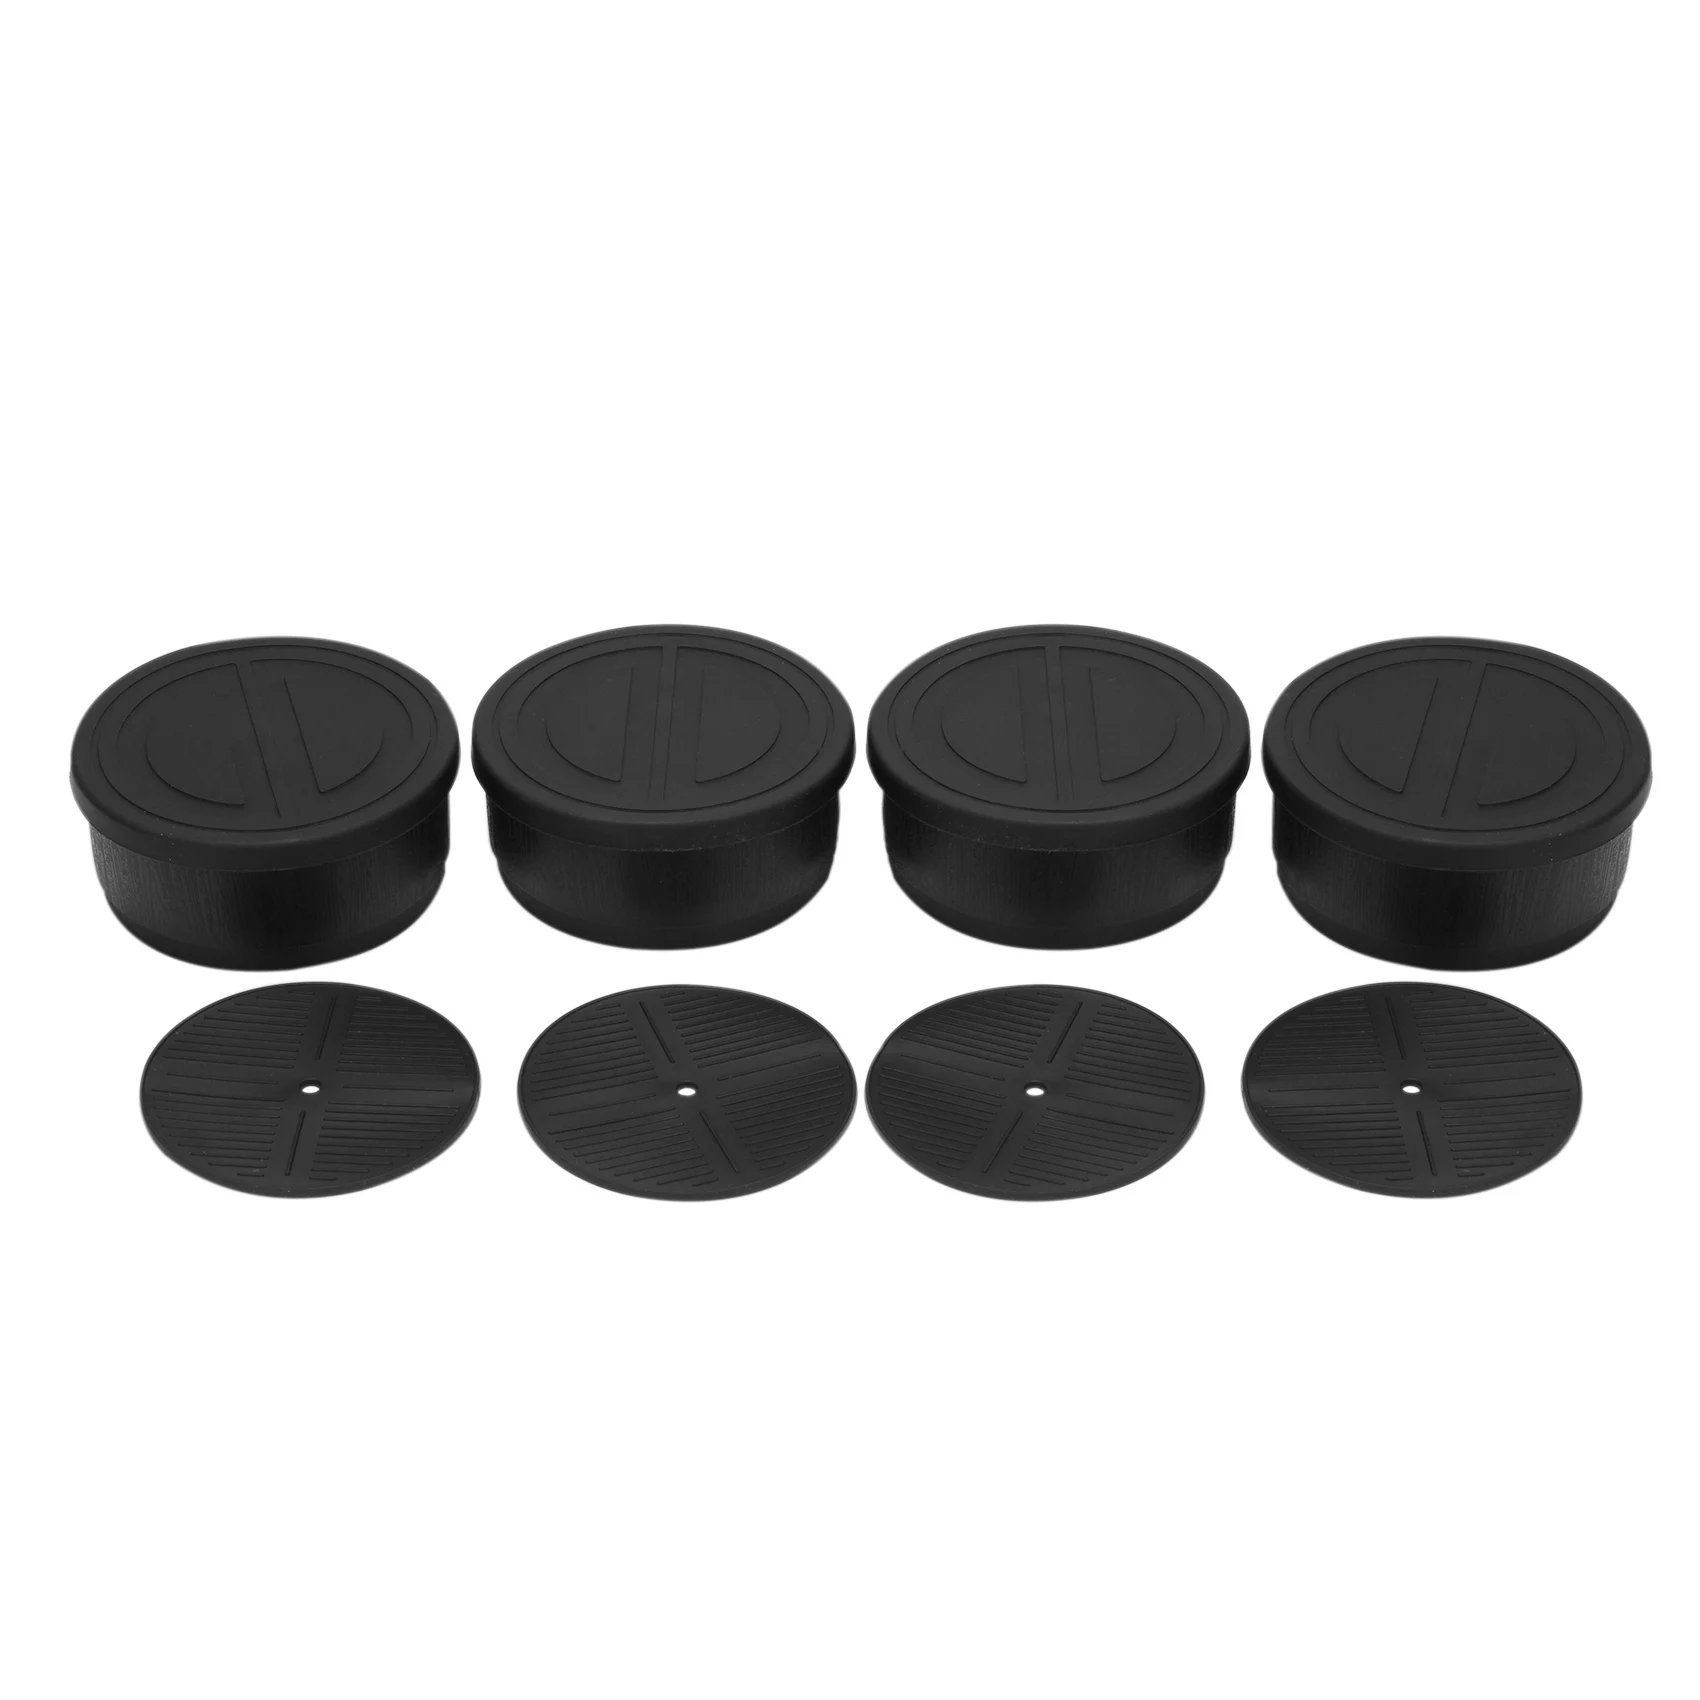 

Bed Risers 1.7 Inch Heavy Duty Adjustable Furniture Risers For Sofa Table Fridge Round Lifts Supports (Black, 4 Piece)